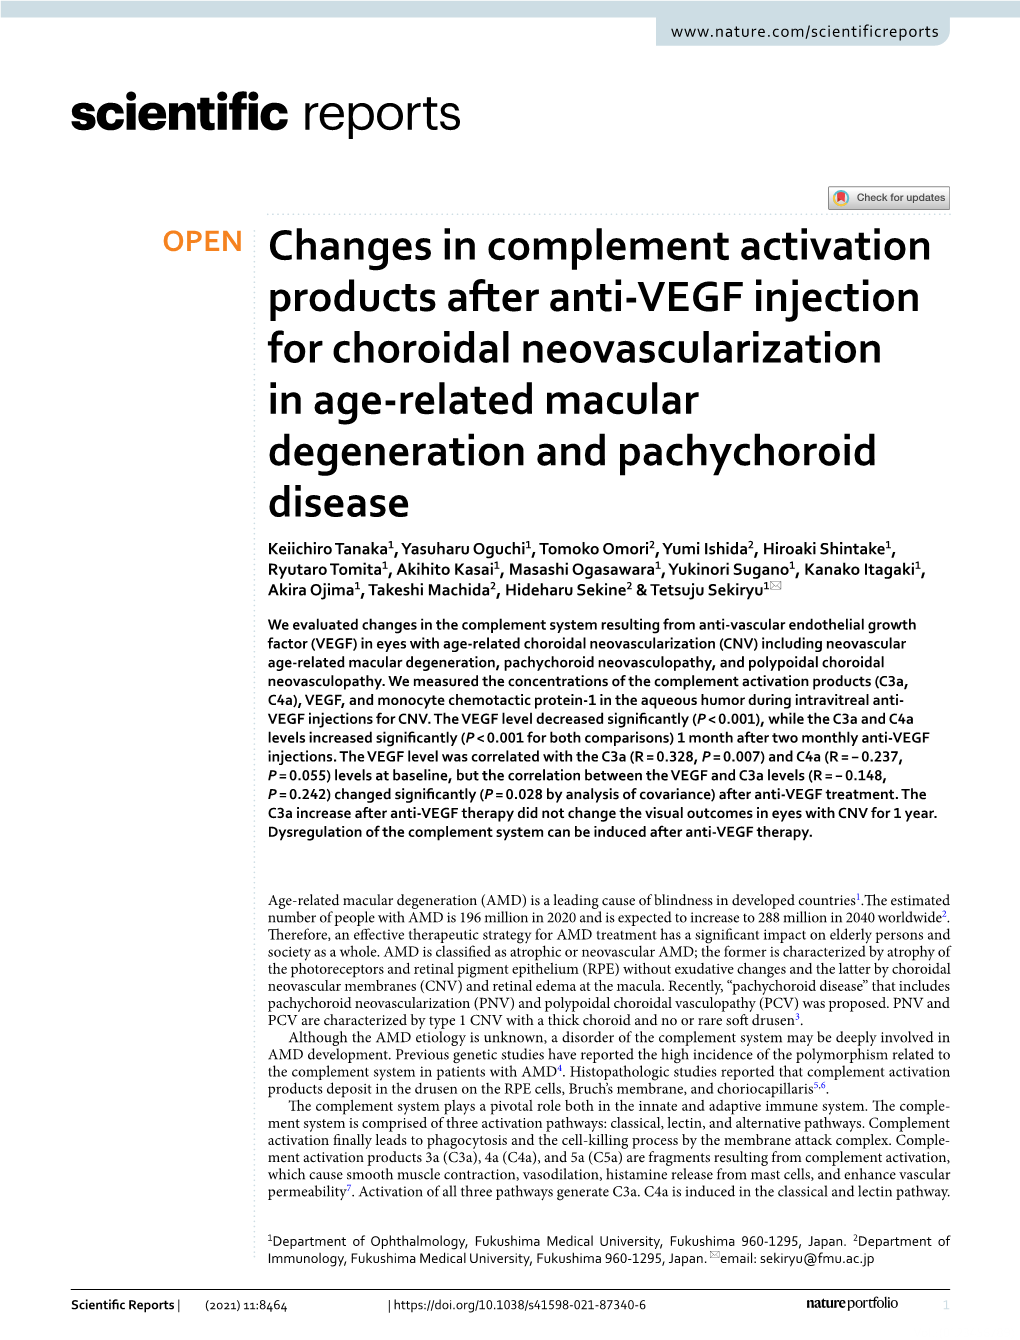 Changes in Complement Activation Products After Anti-VEGF Injection for Choroidal Neovascularization in Age-Related Macular Dege